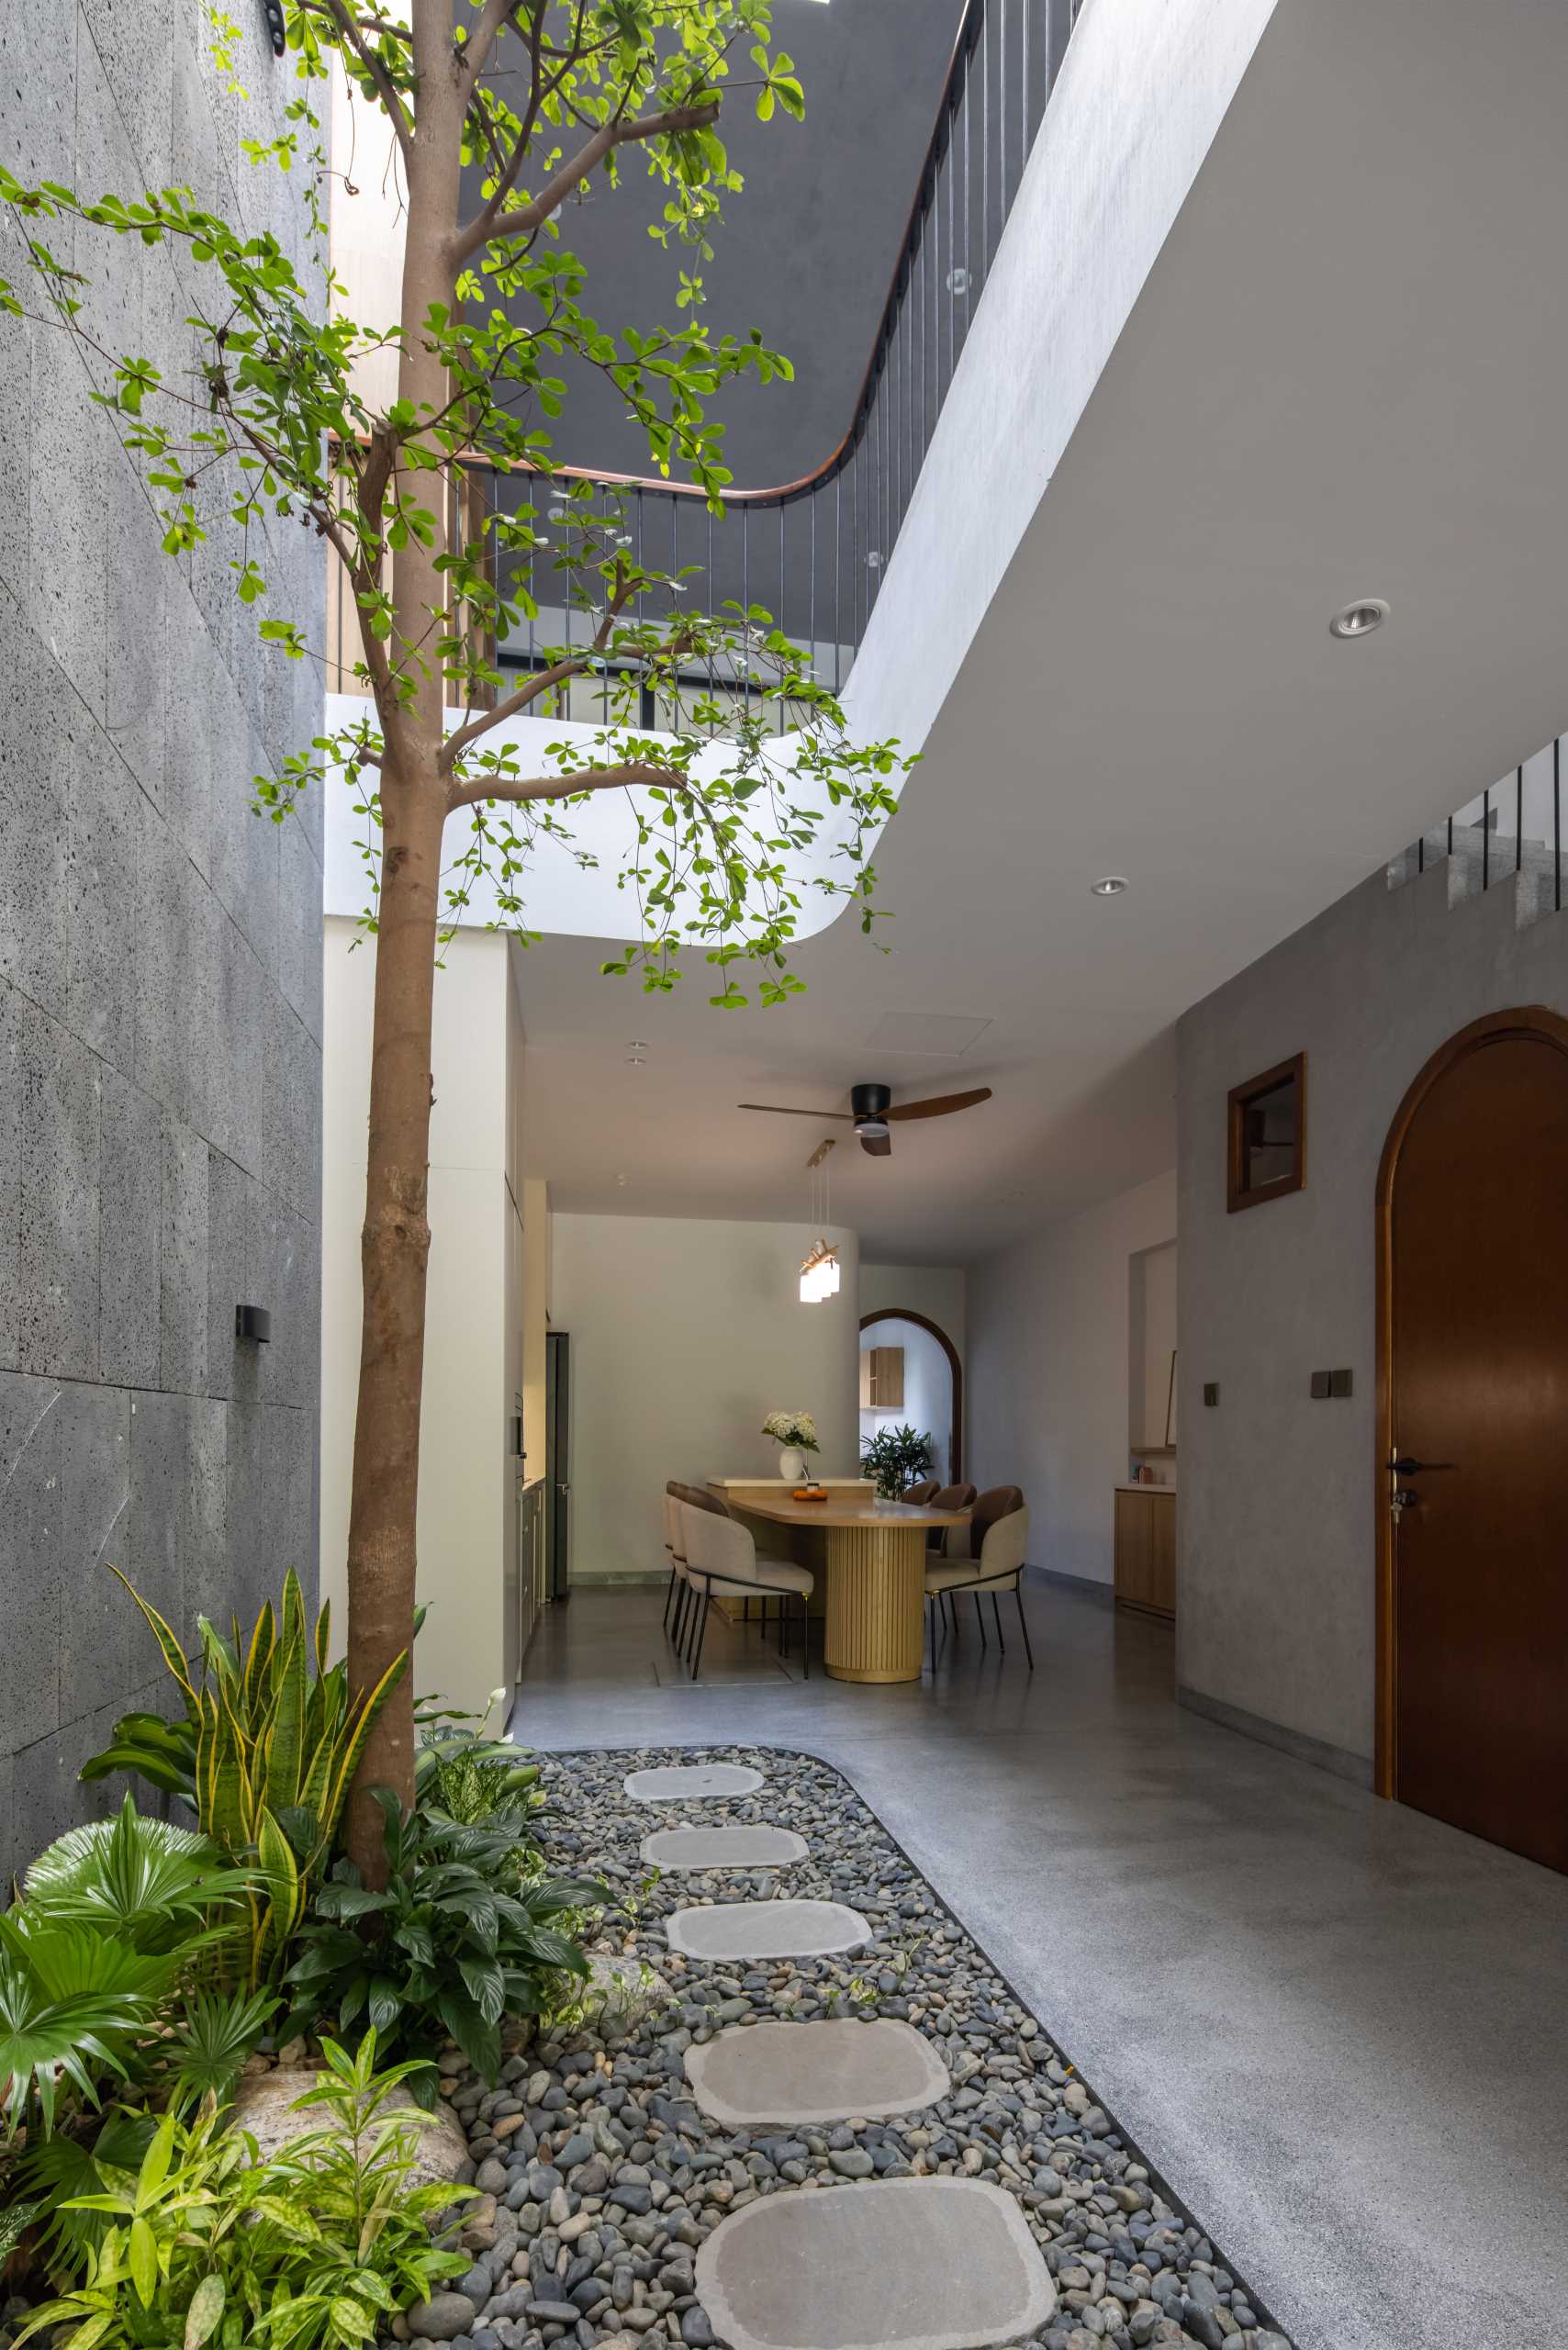 The living room in this modern home also has a view of an interior garden with a tree and smaller plants, that line the walkway to the dining area and kitchen.